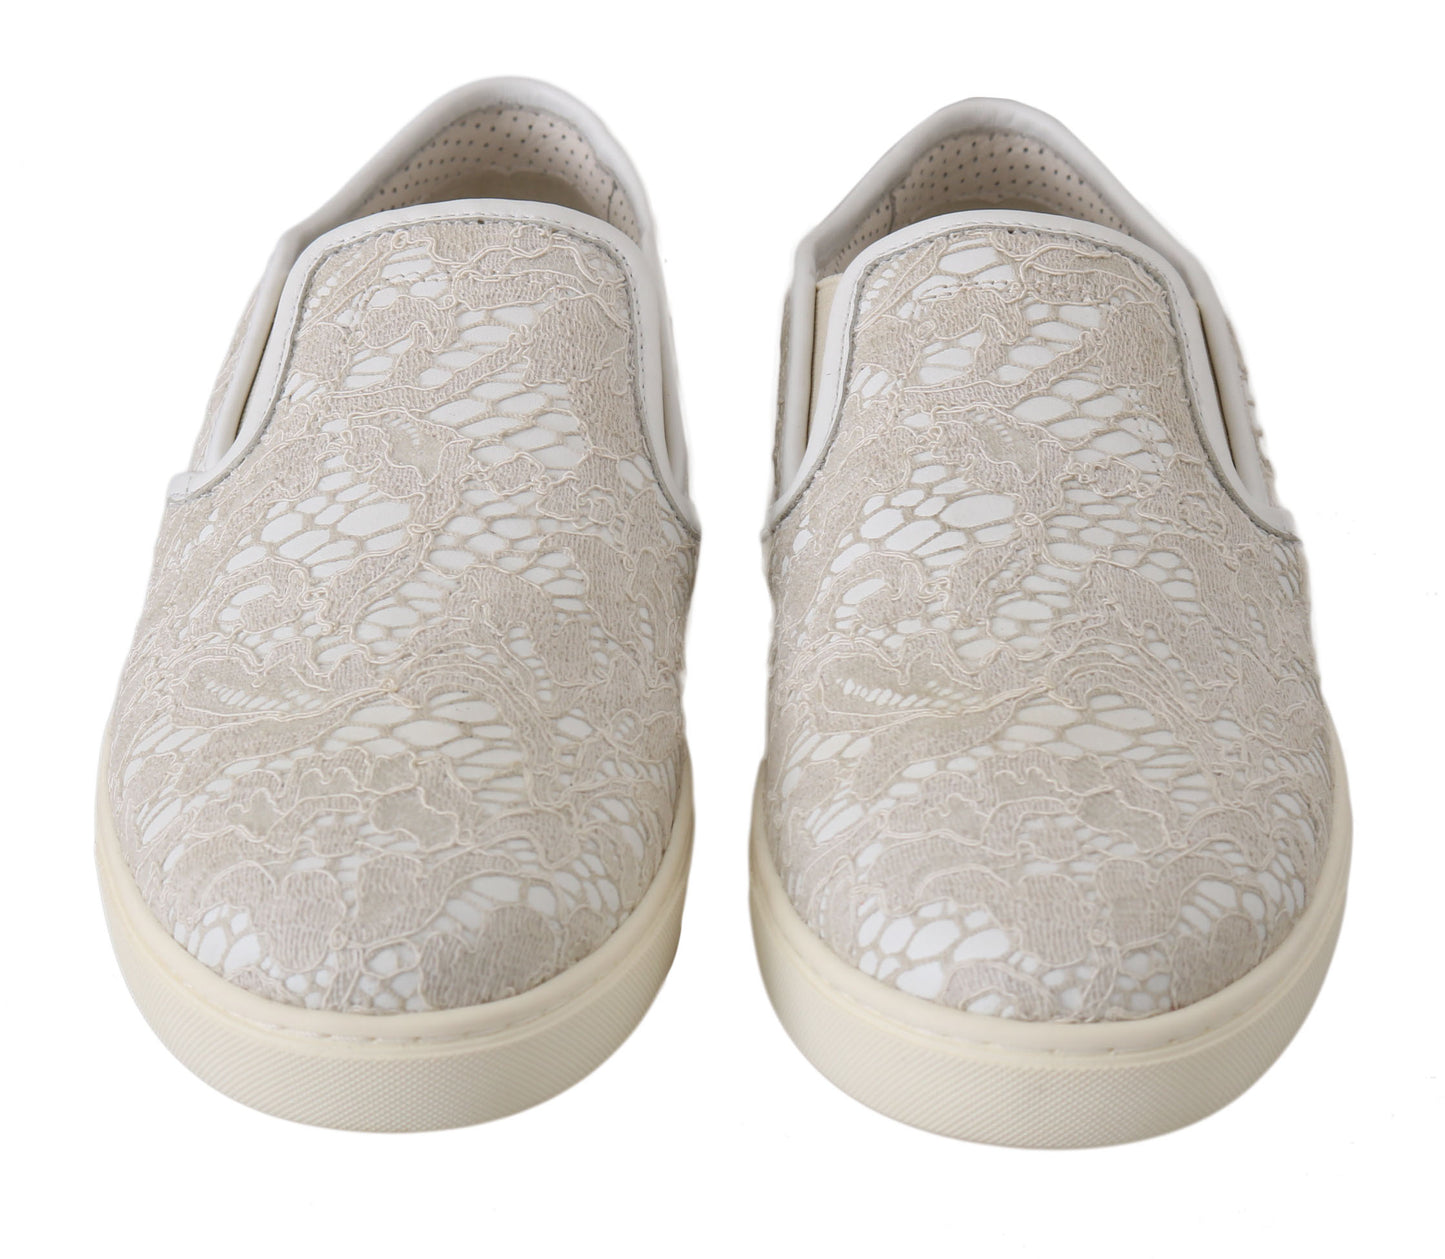 Dolce & Gabbana White Leather Lace Slip On Loafers Shoes